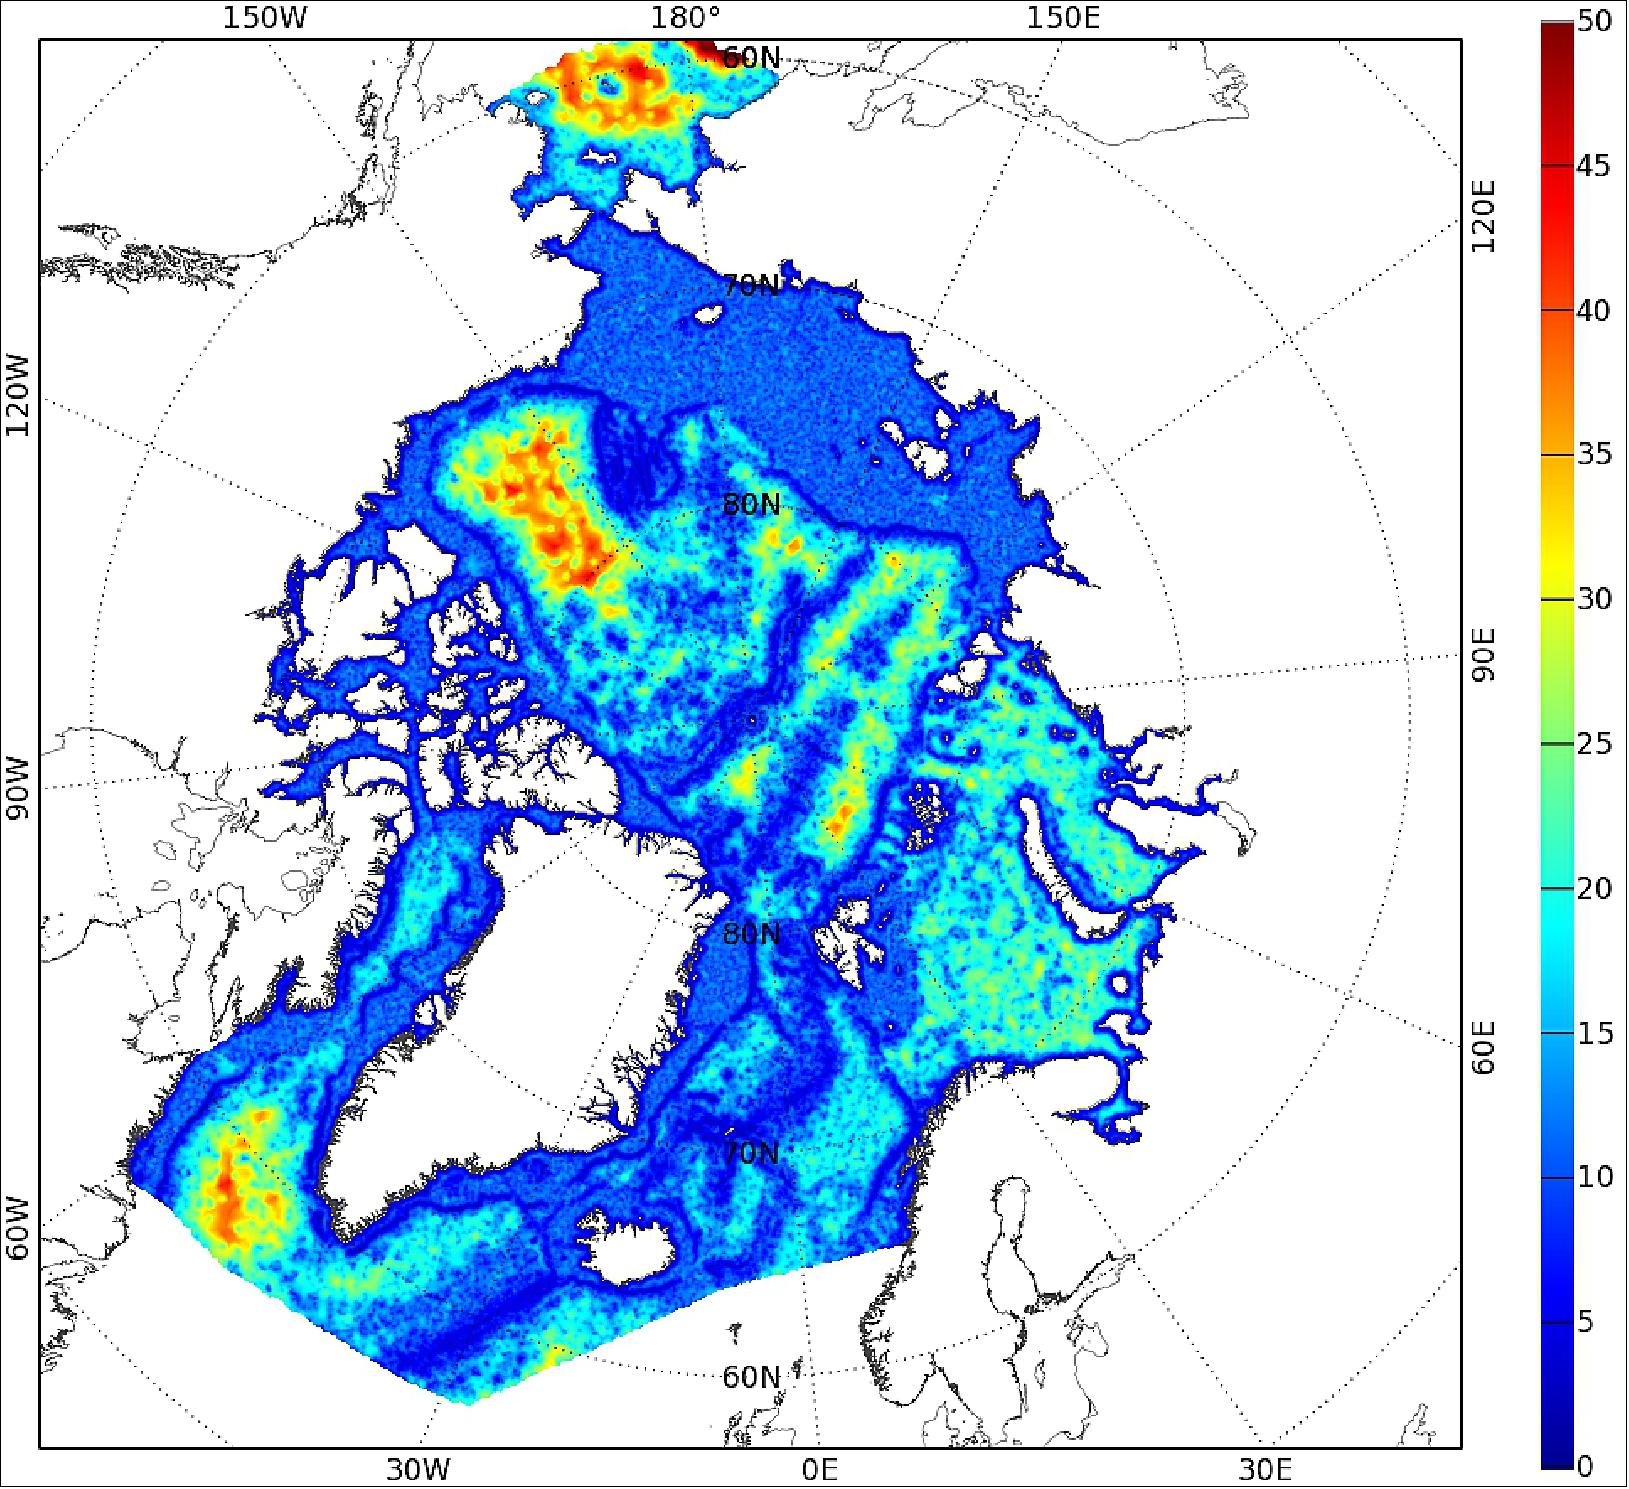 Figure 39: High-resolution tidal modelling. Resolution (in km) of the non-regular grid of the Arctide2017 regional tidal model. The grid of the model was specifically refined in the regions where the tides are more complex, in order to obtain a more reliable estimate (image credit: NOVELTIS)